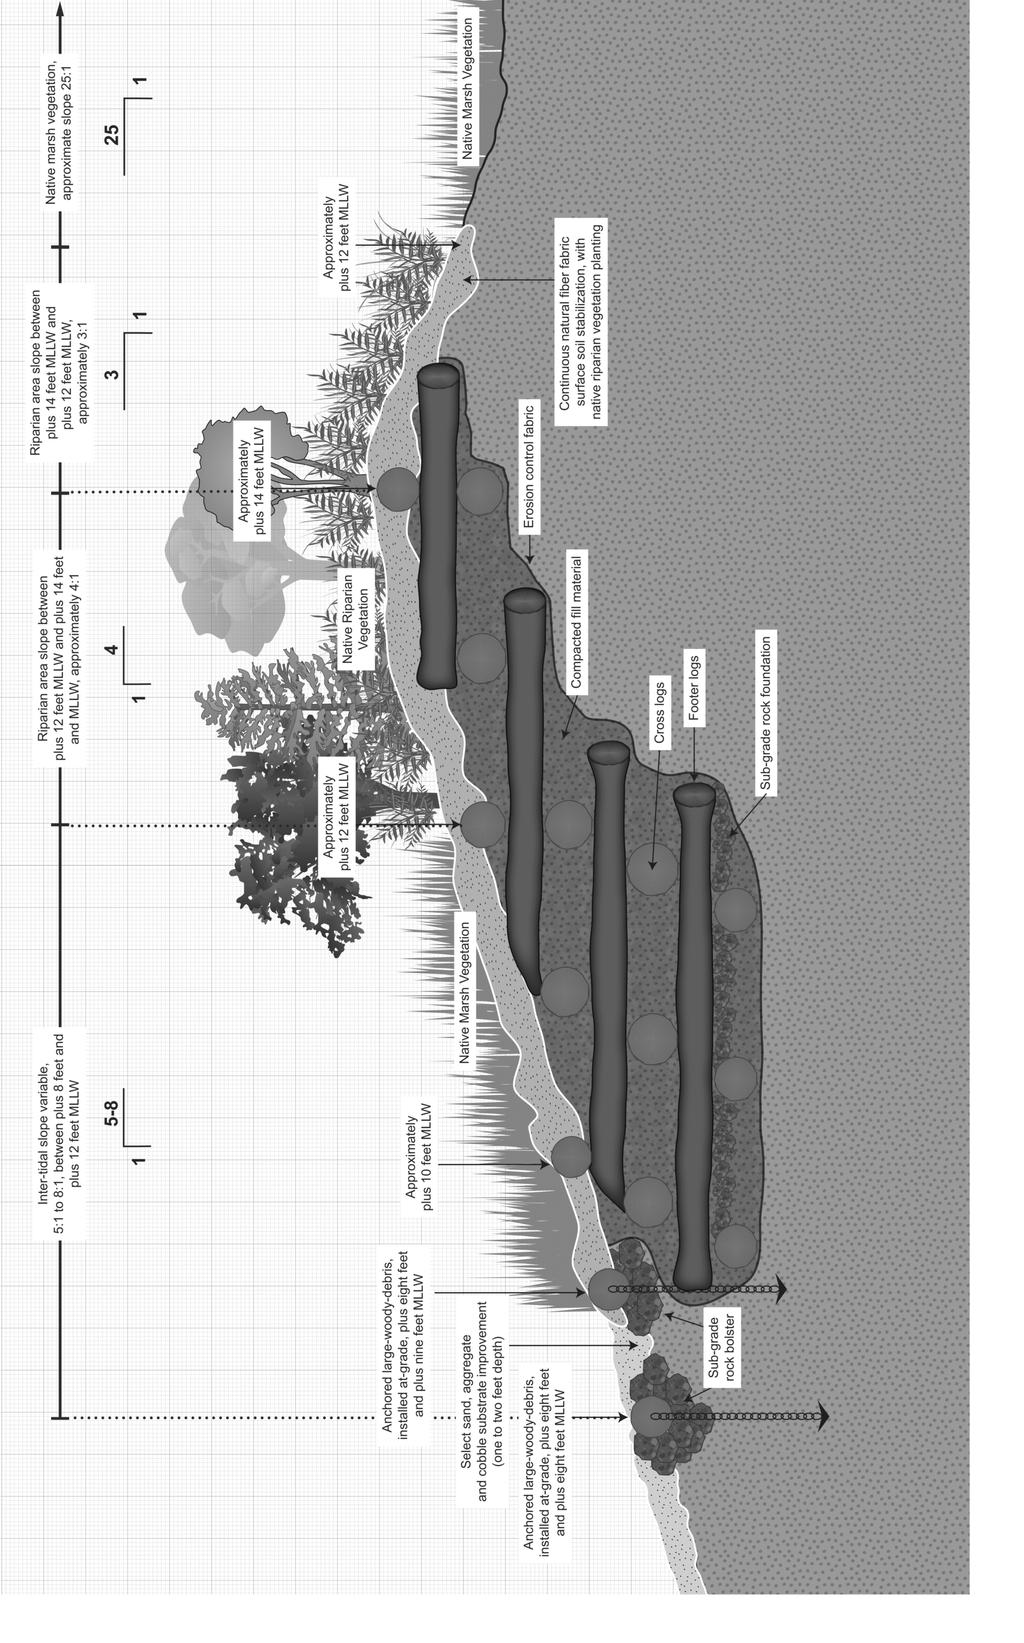 Not to Scale Concept Drawing Courtesy of Port of Seattle Plot Date: 4/26/17-11:9am, Plotted by: gary.